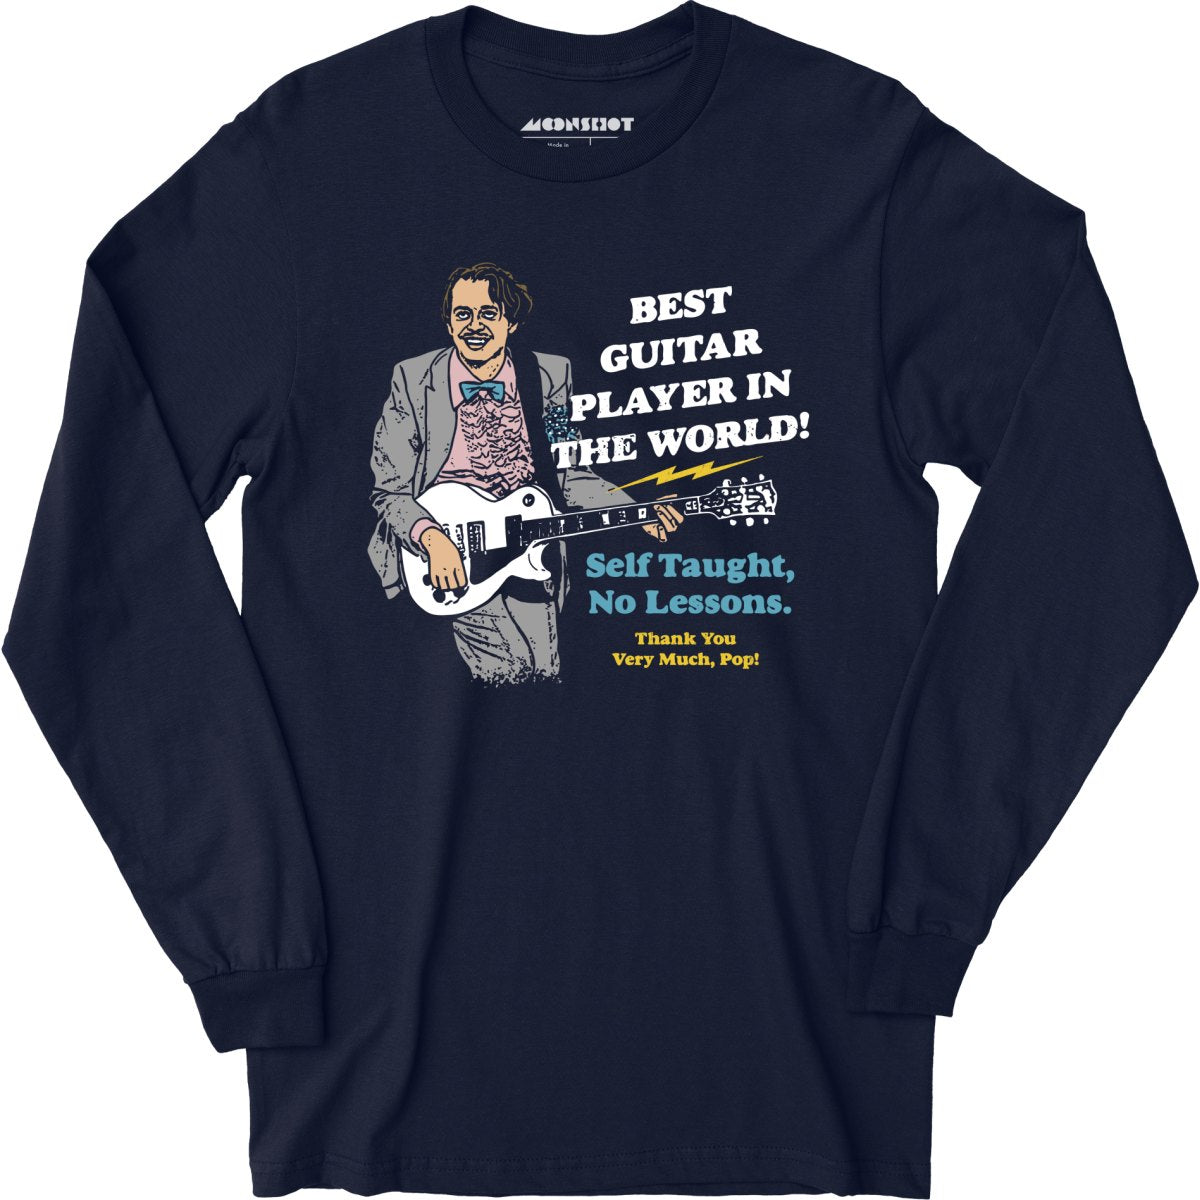 Best Guitar Player in The World! - Long Sleeve T-Shirt